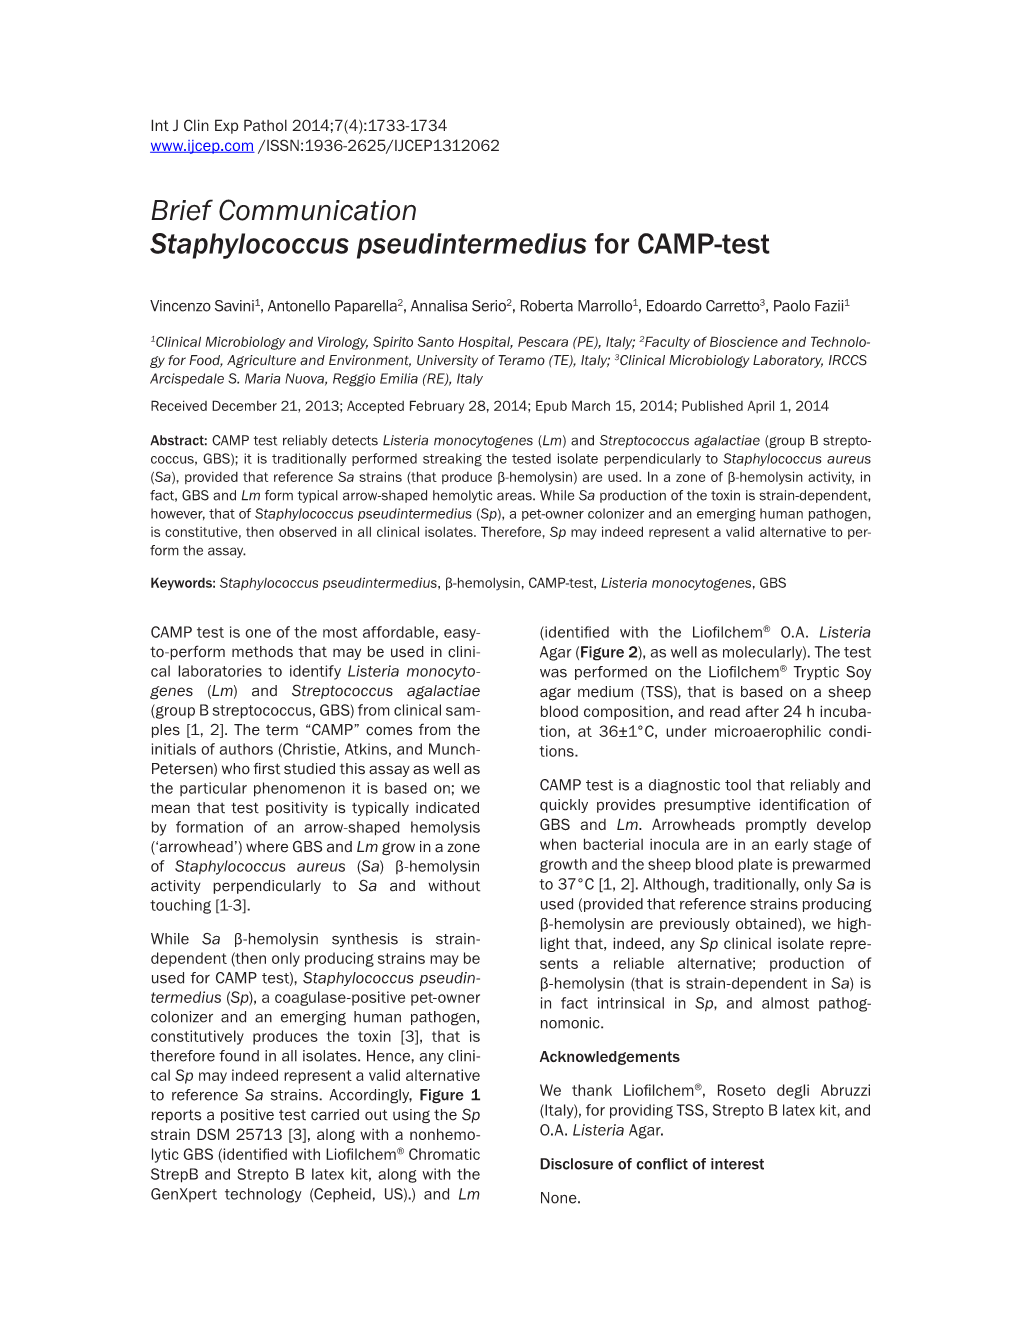 Brief Communication Staphylococcus Pseudintermedius for CAMP-Test